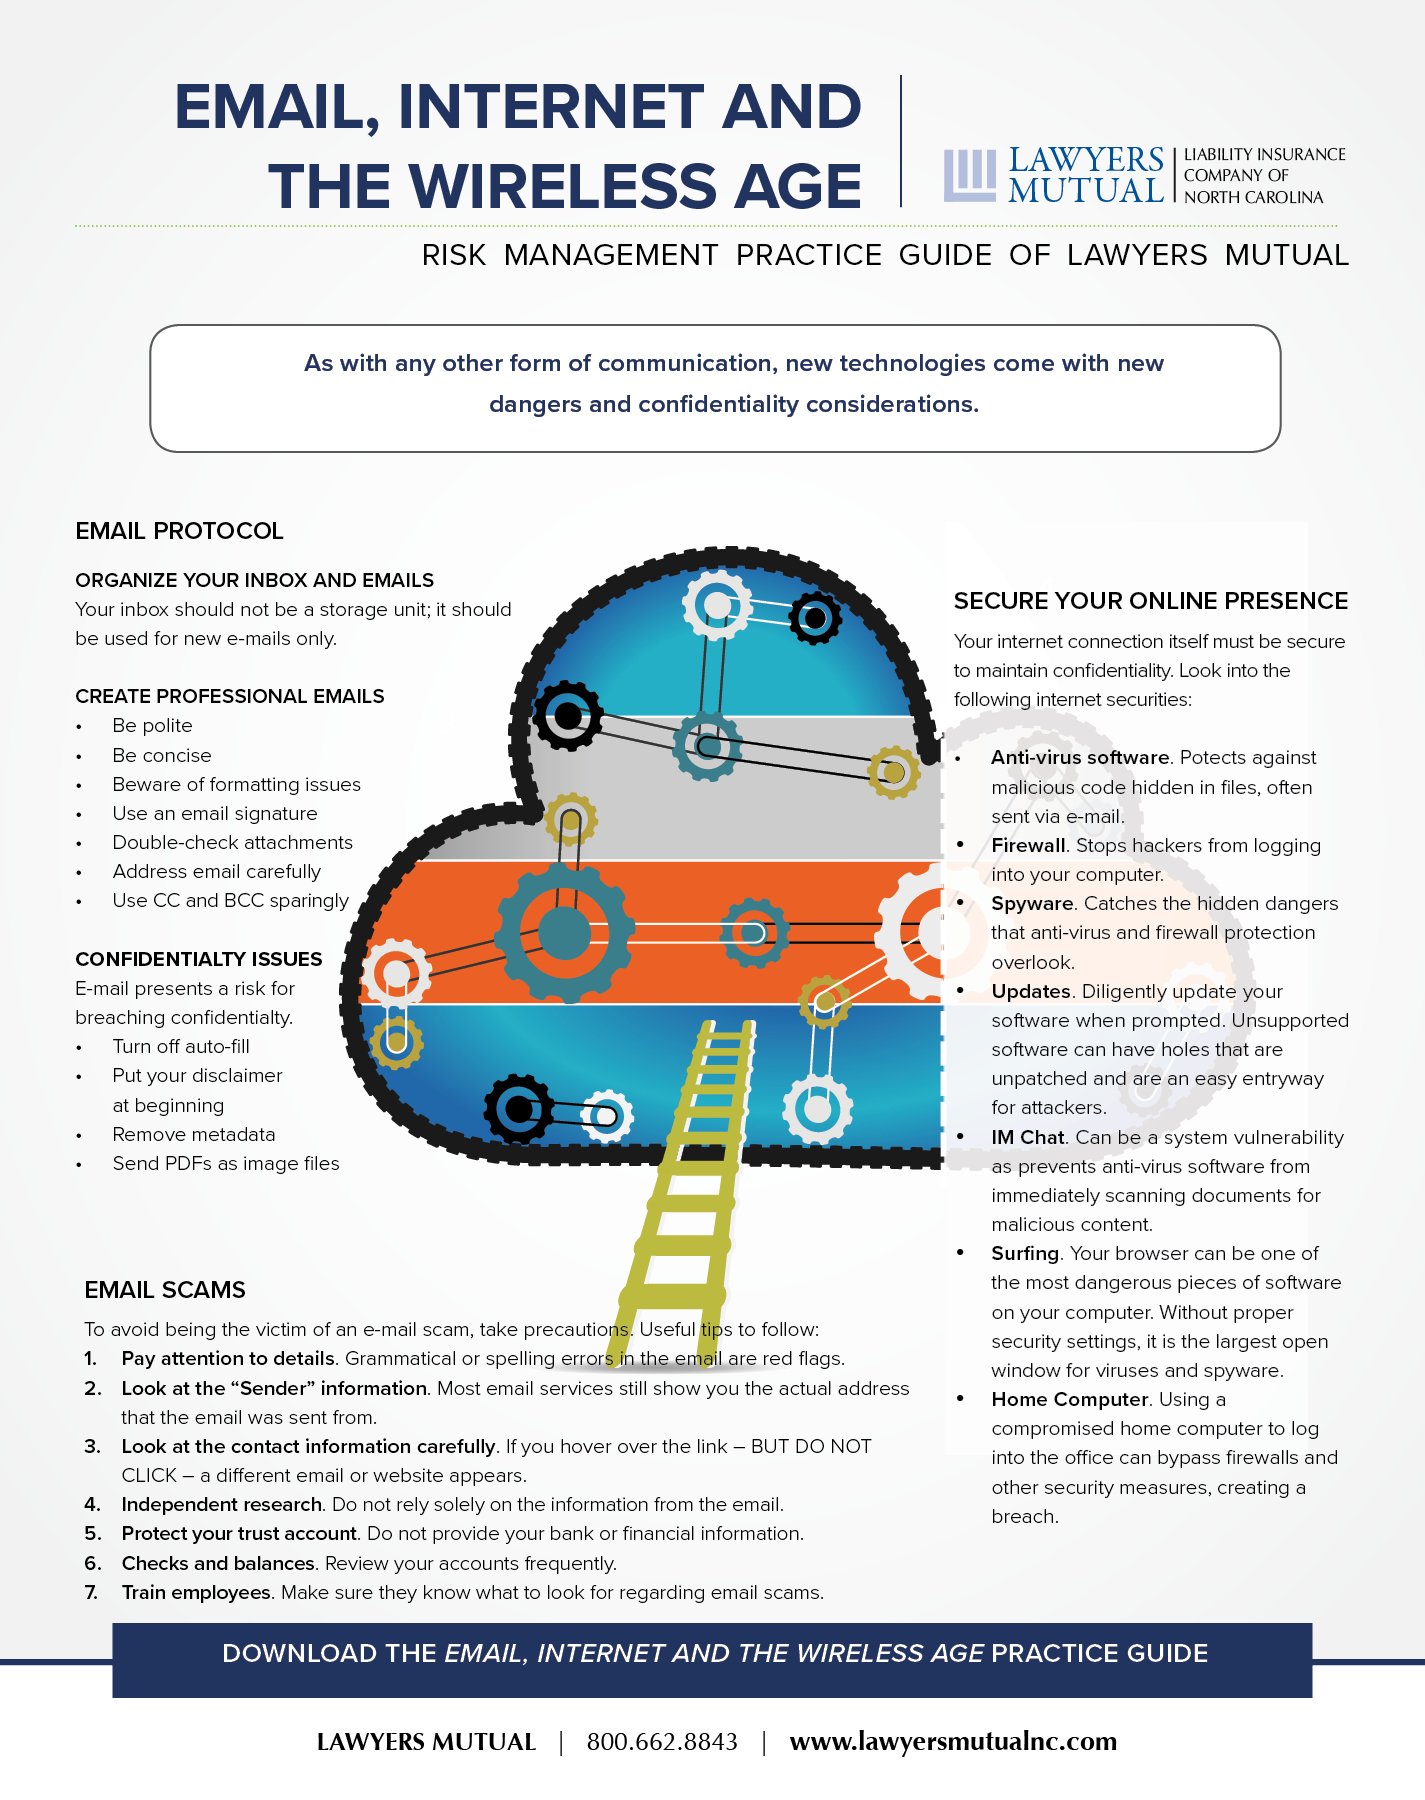 Infographic for email, internet, and the wireless age practice guide